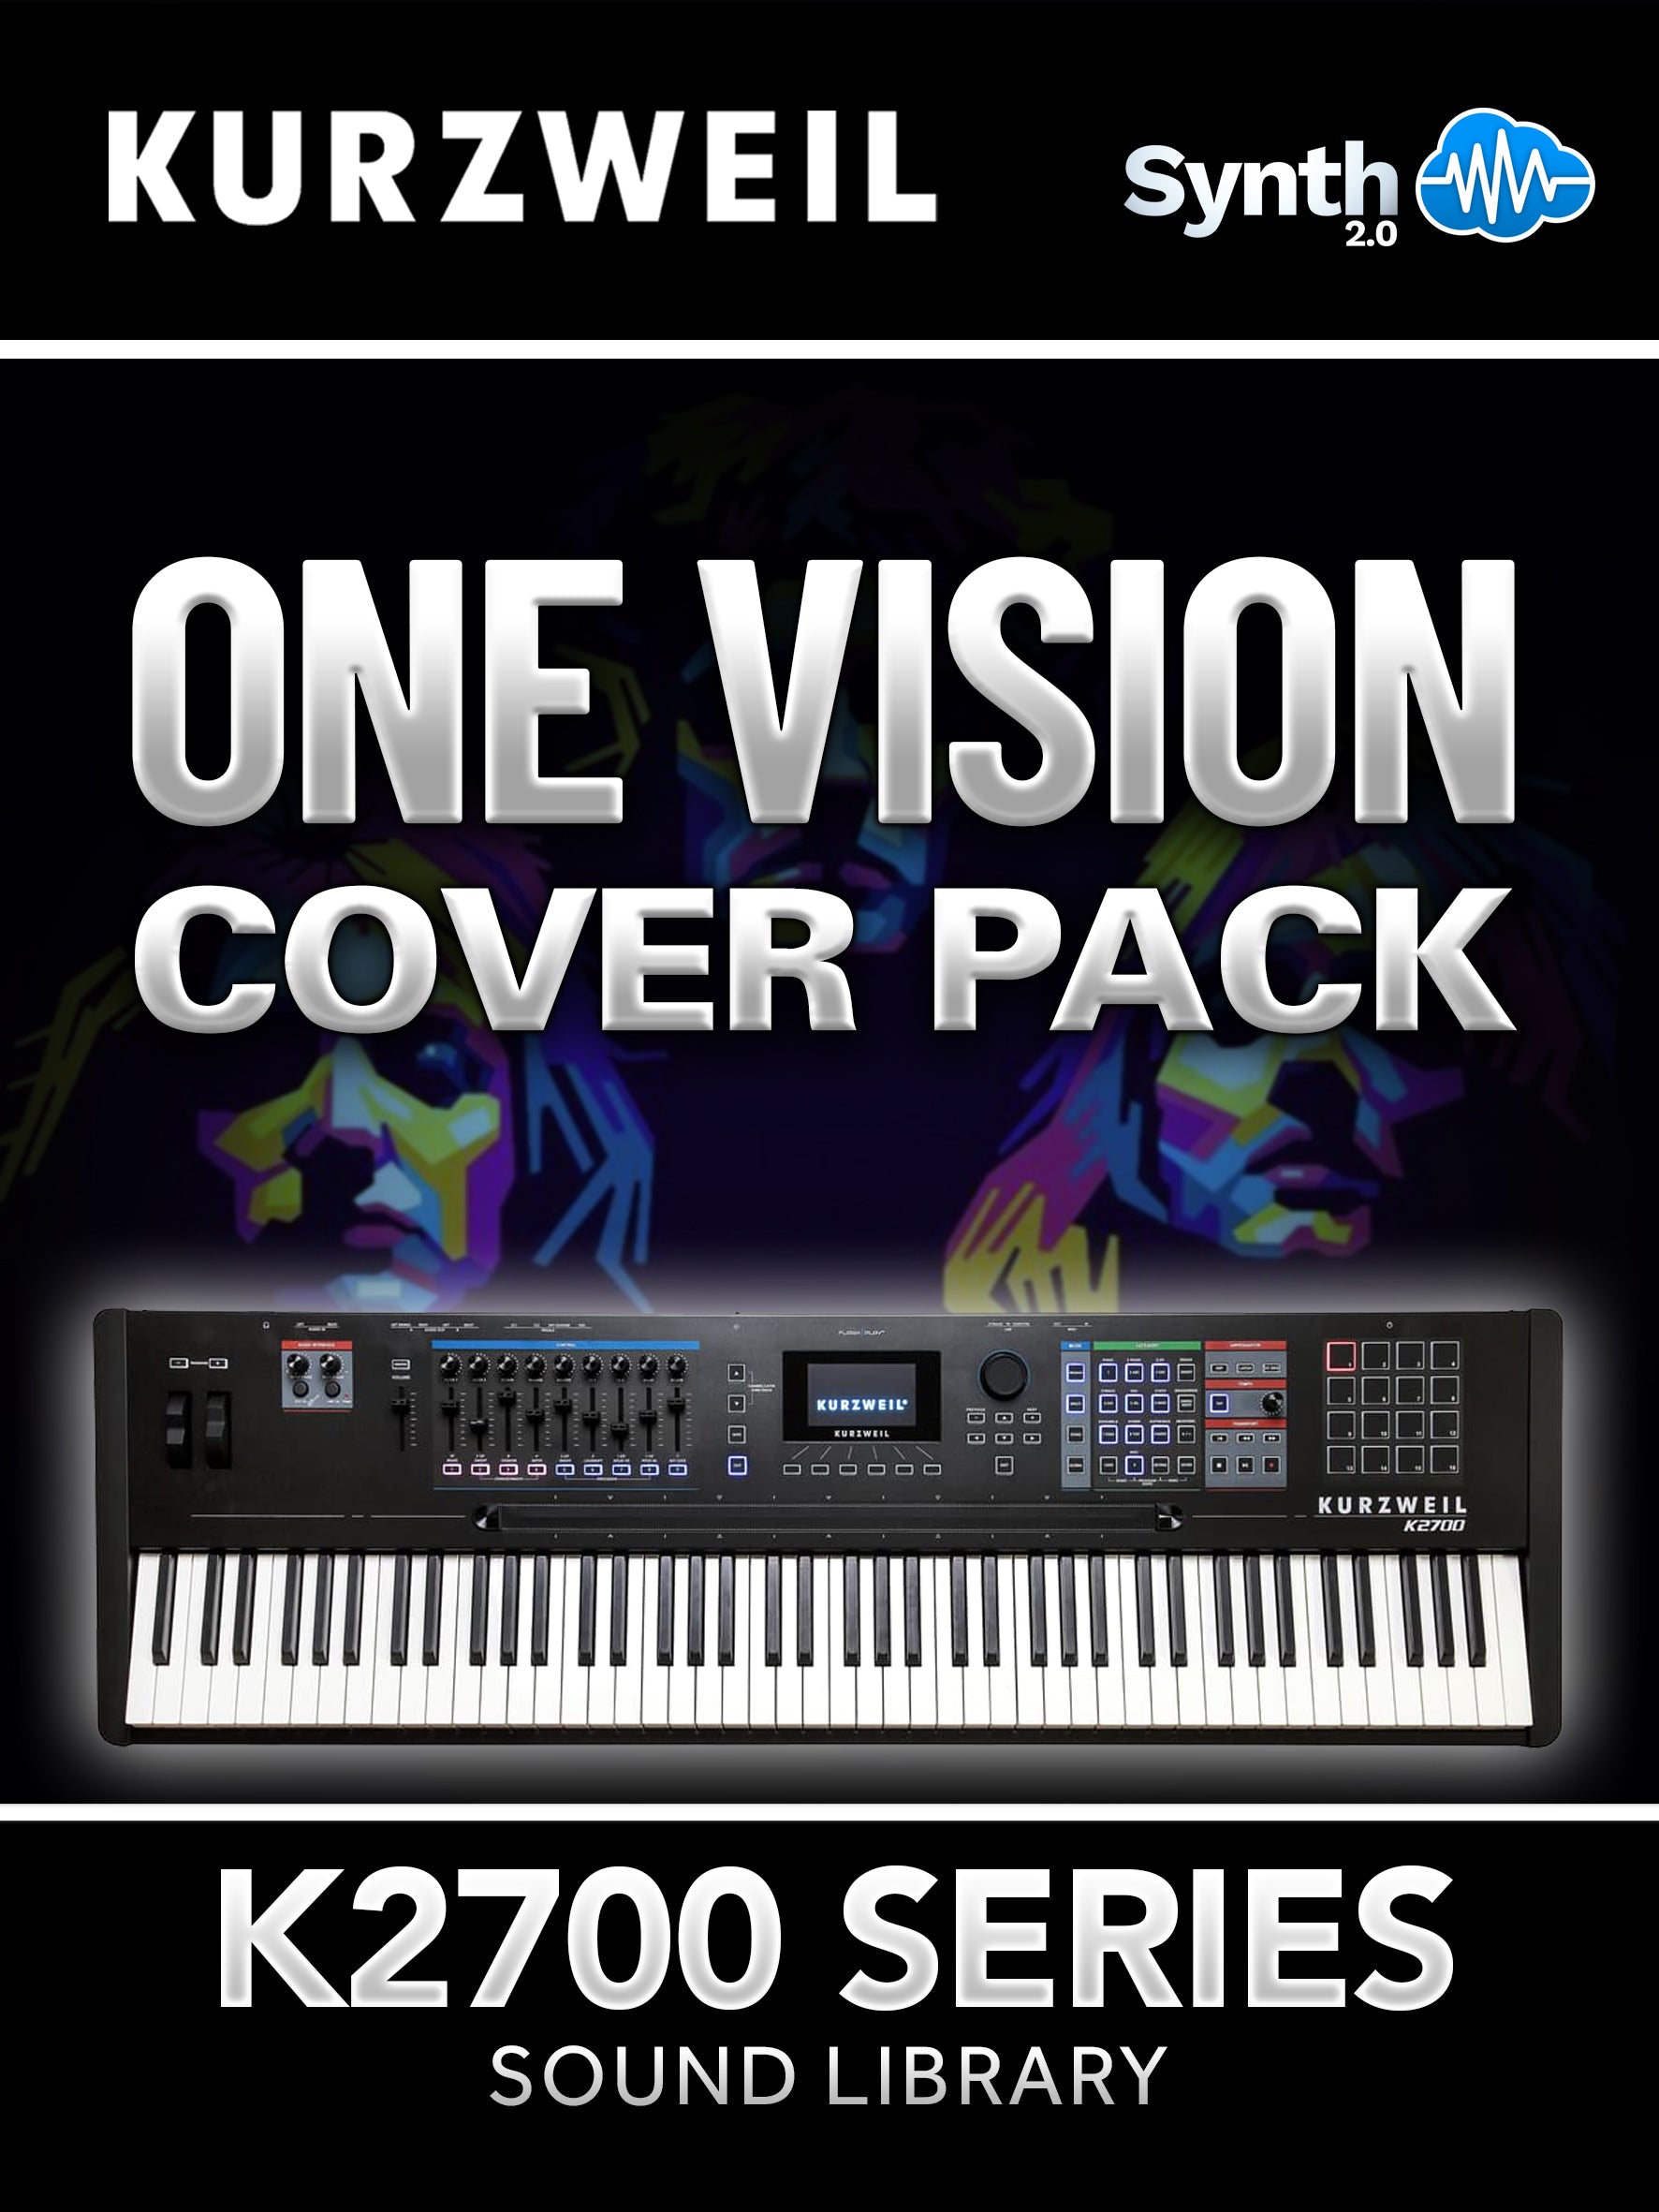 K27008 - One Vision Cover Pack - Kurzweil K2700 ( 28 presets )